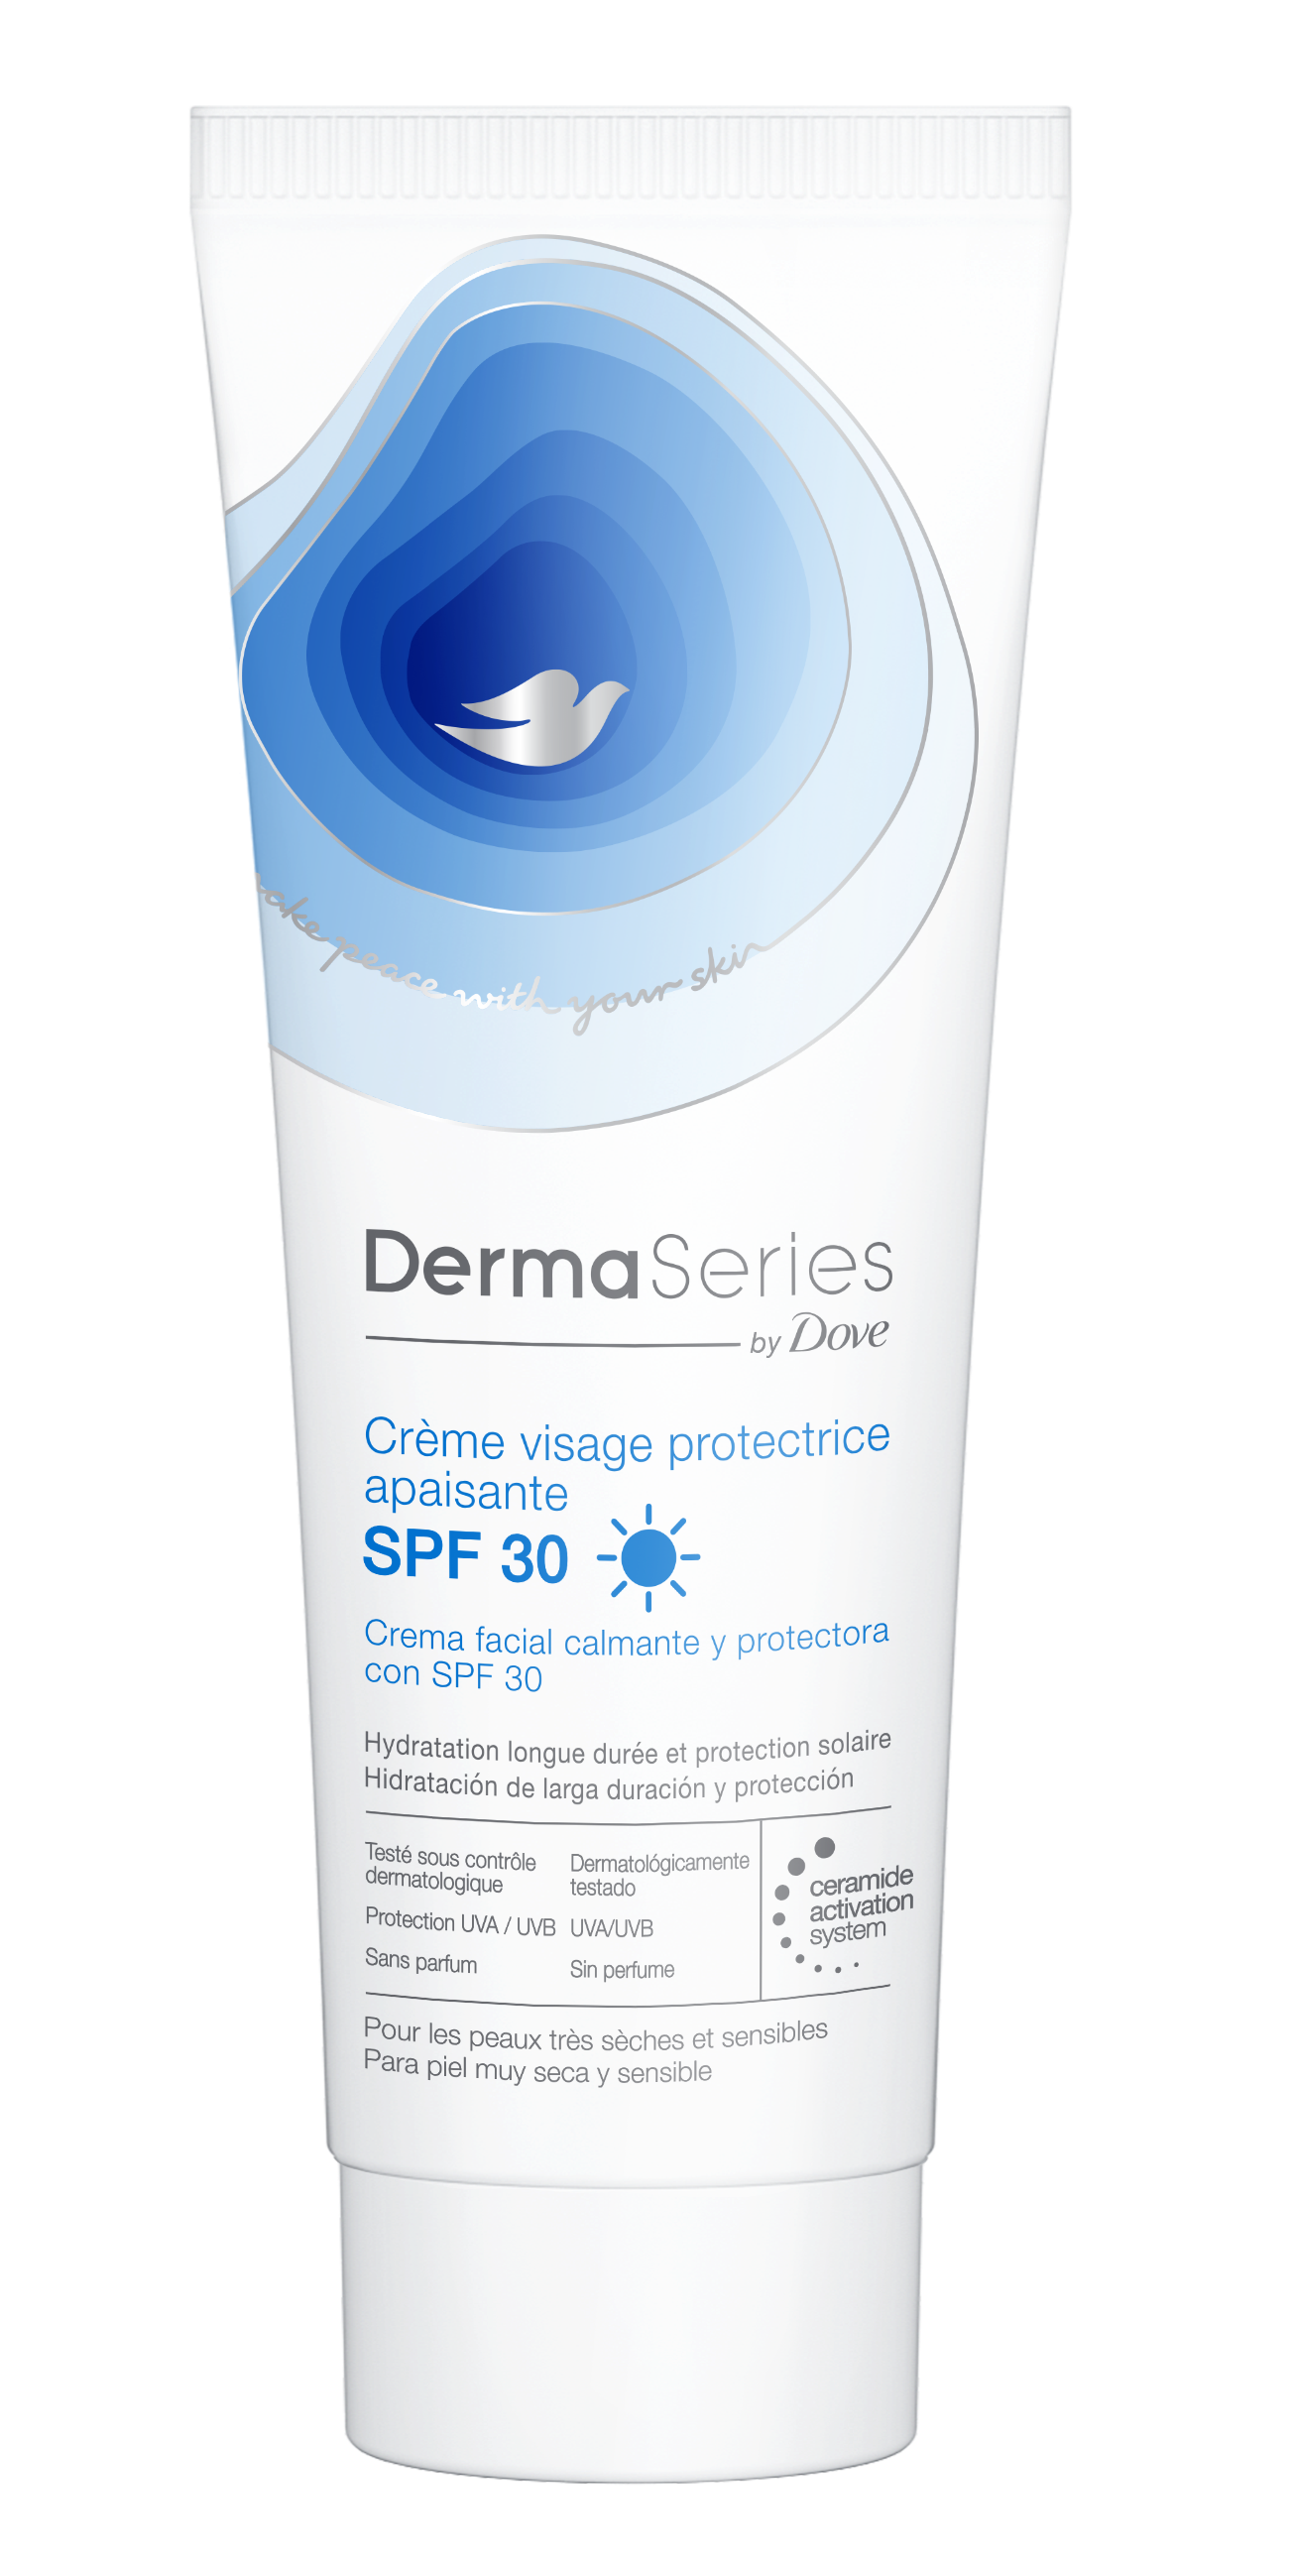 Soothing and protective Face Cream with SPF 30, from DermaSeries by Dove (€13.70), formulated with glycerin and niacinamide as main ingredients.